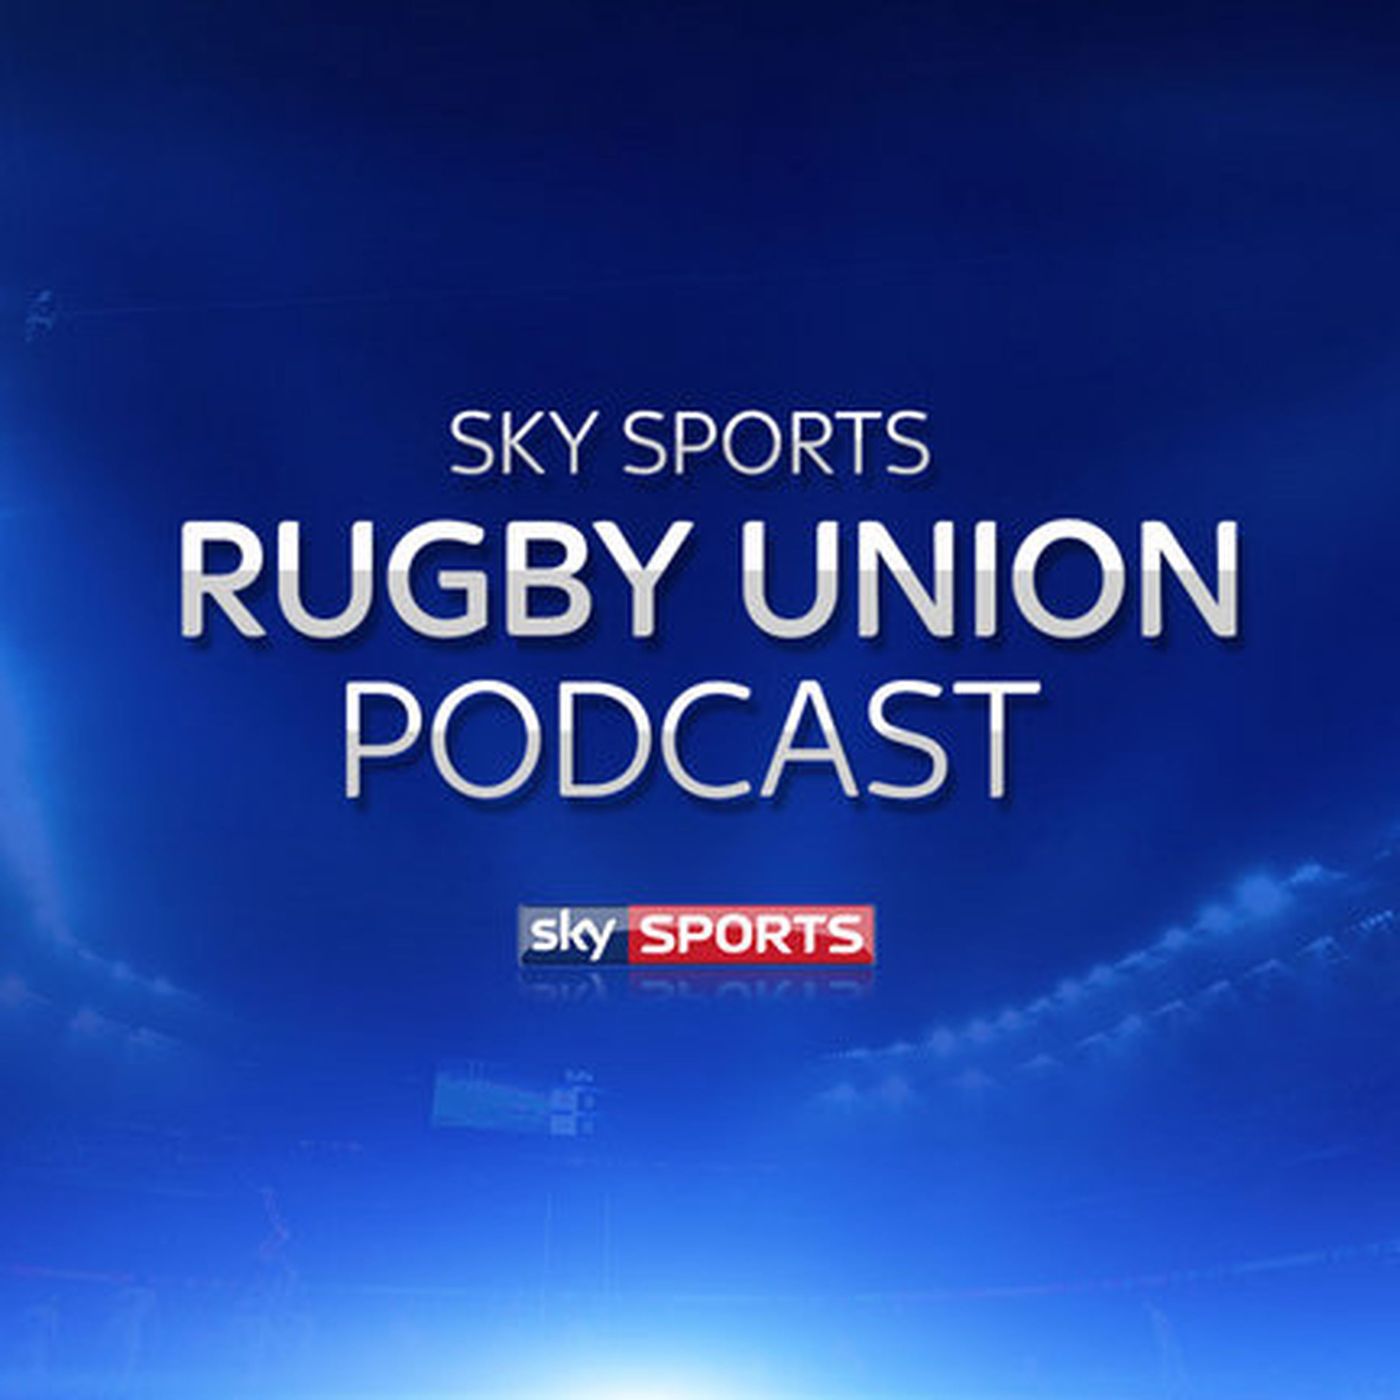 Sky Sports Rugby Union Podcast - 11th May